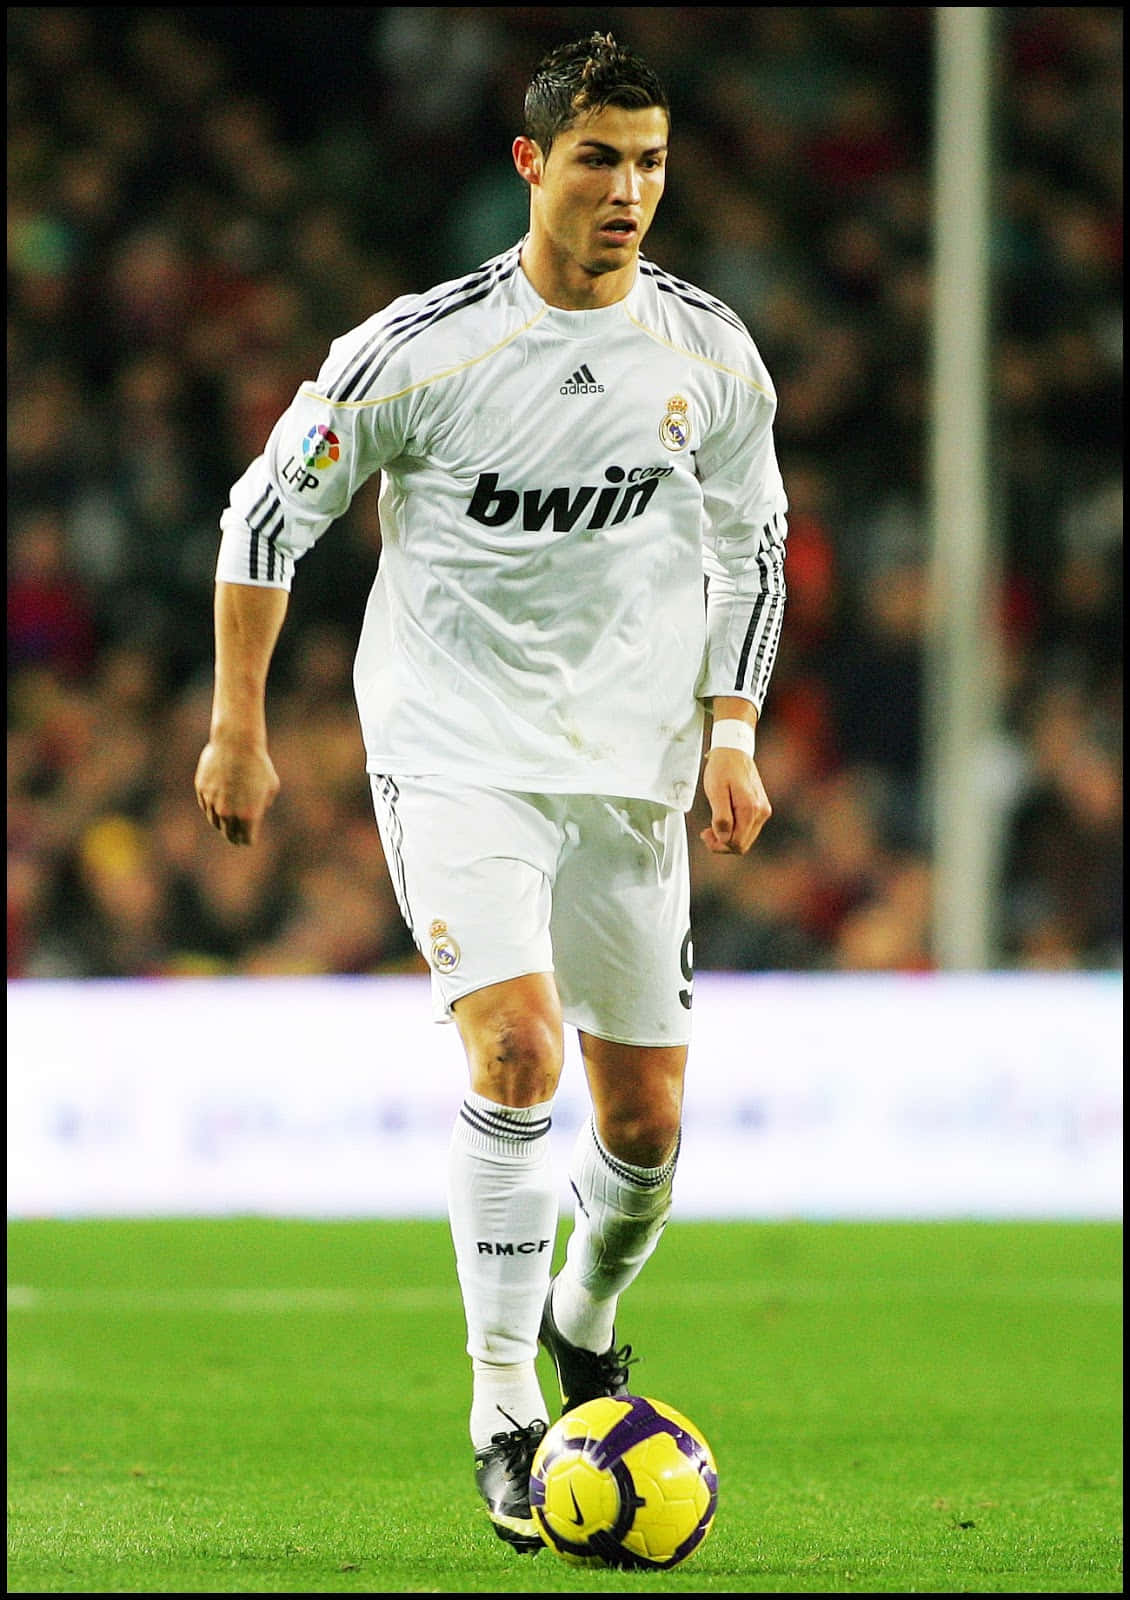 Ronaldo in action during a football match